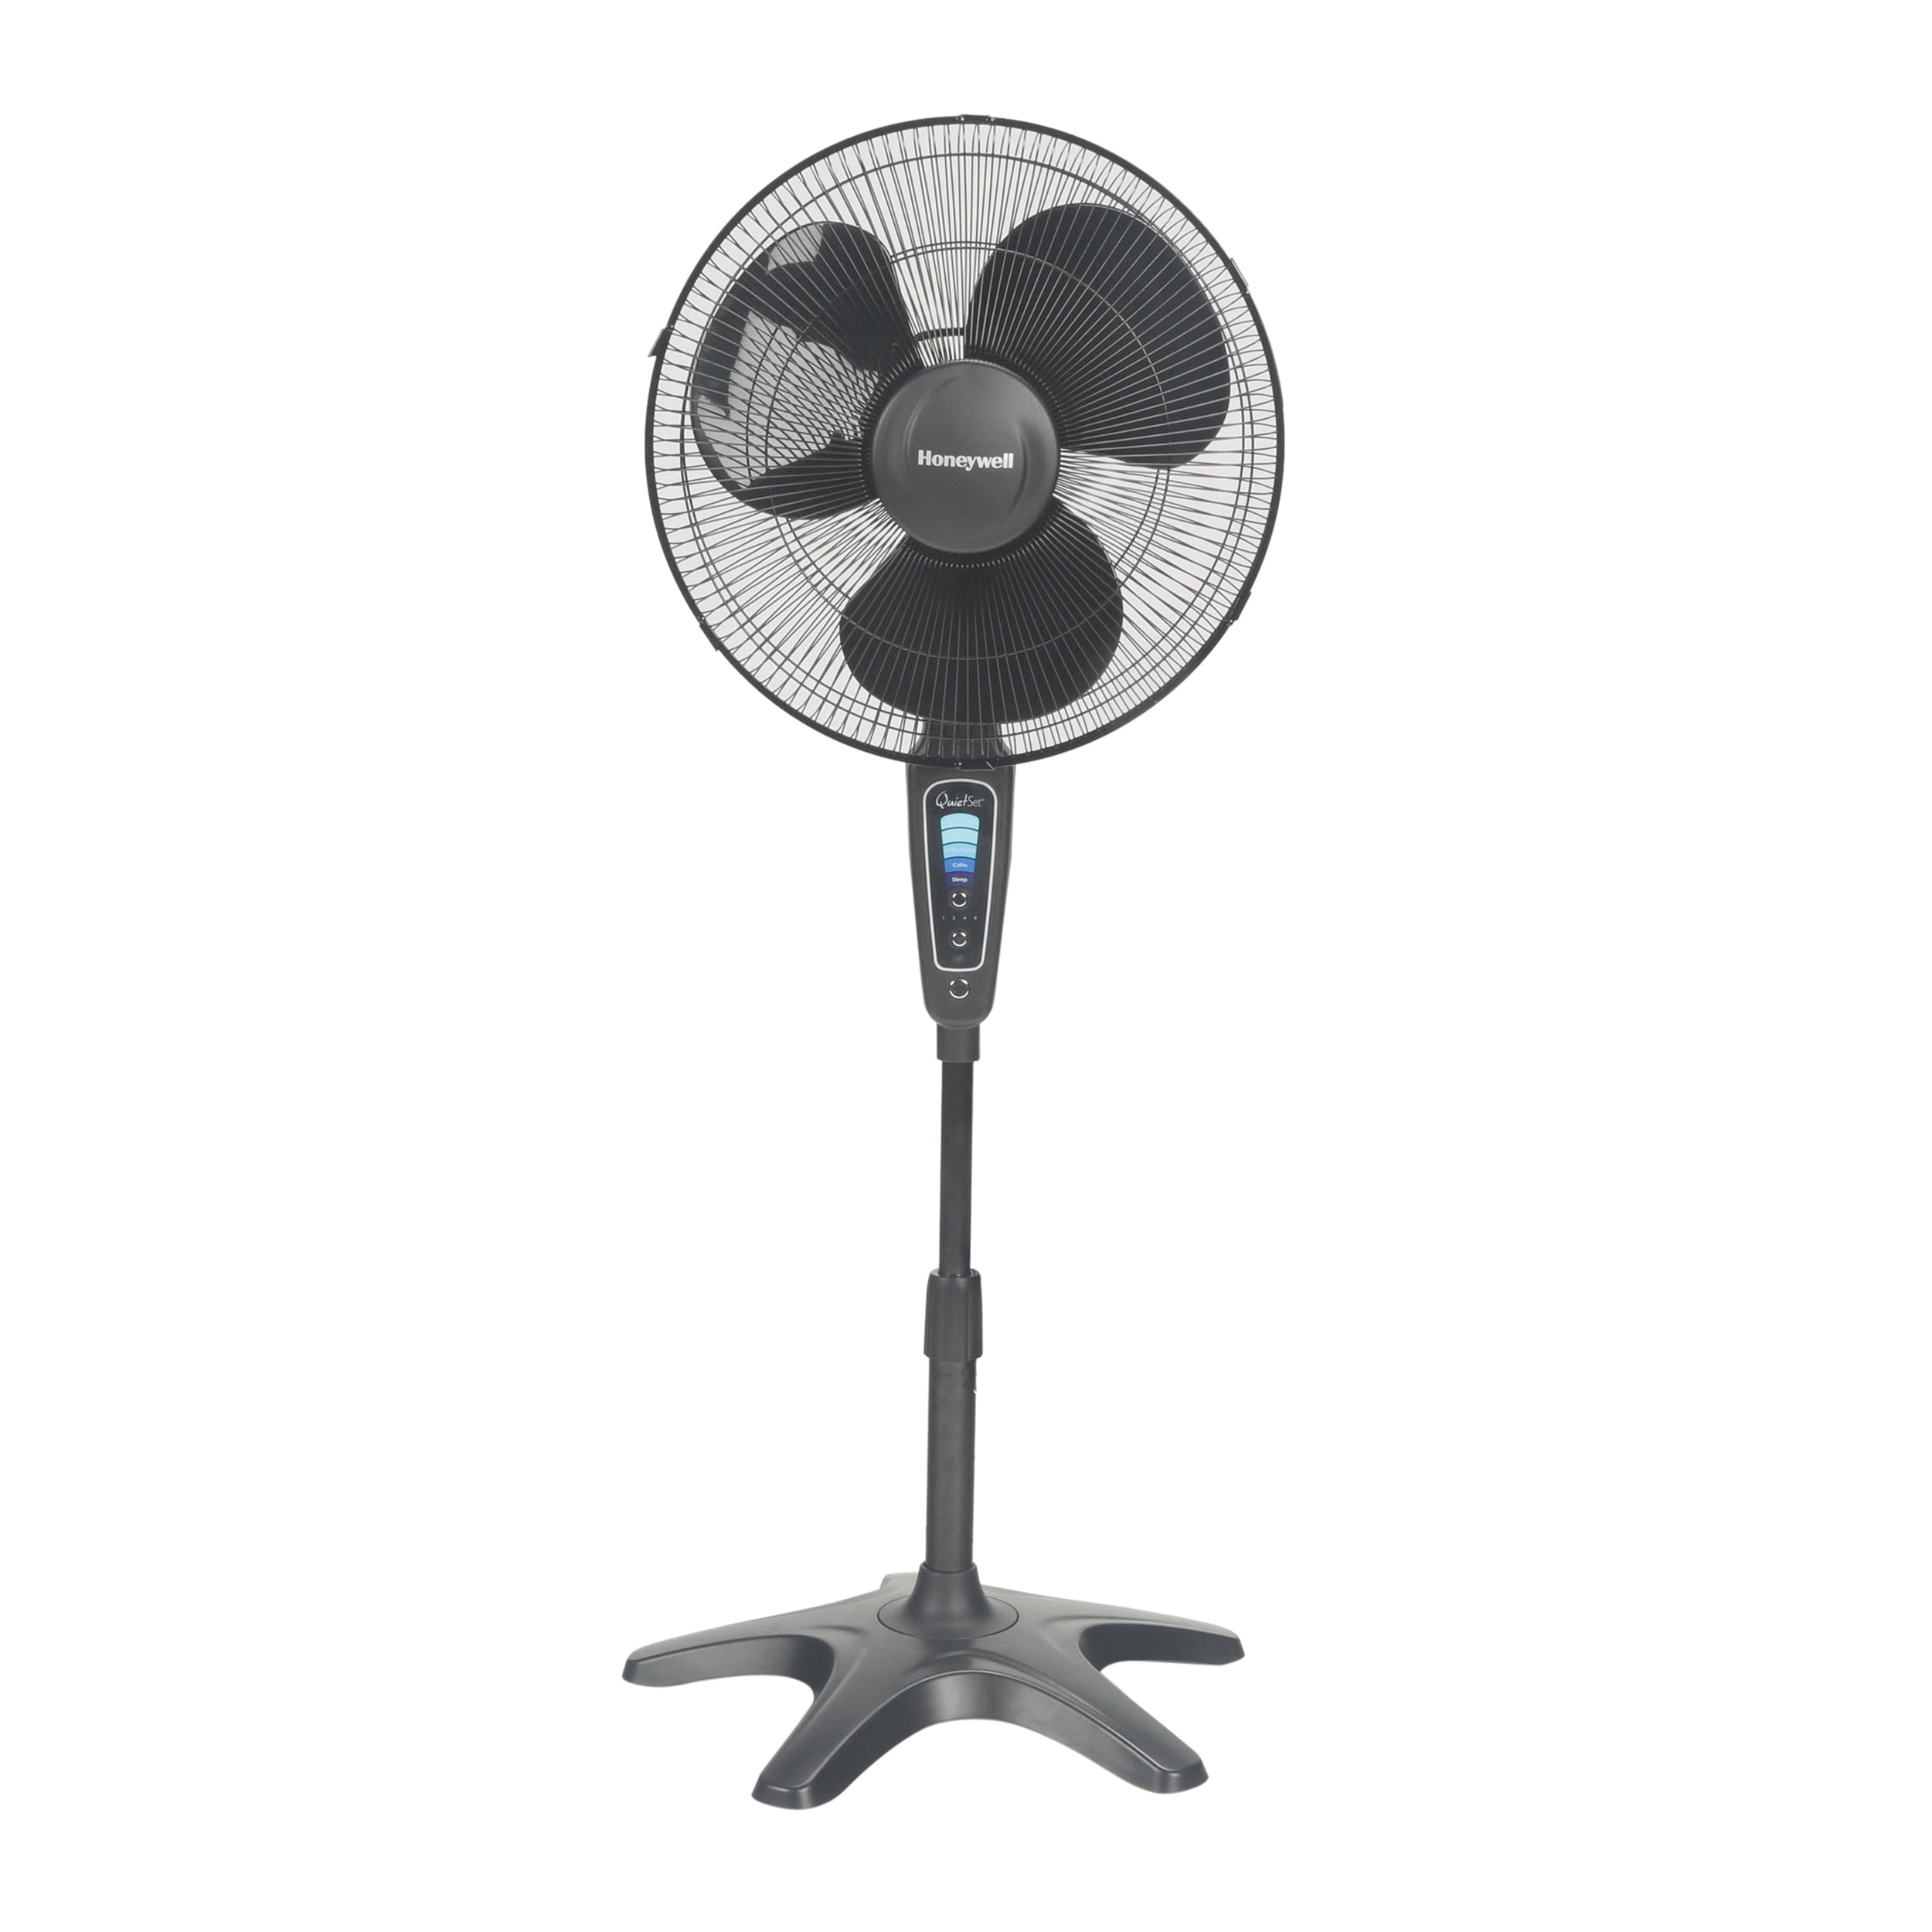 Honeywell Advanced QuietSet with Noise Reduction Technology 16 Whole Room Pedestal Fan HSF600B